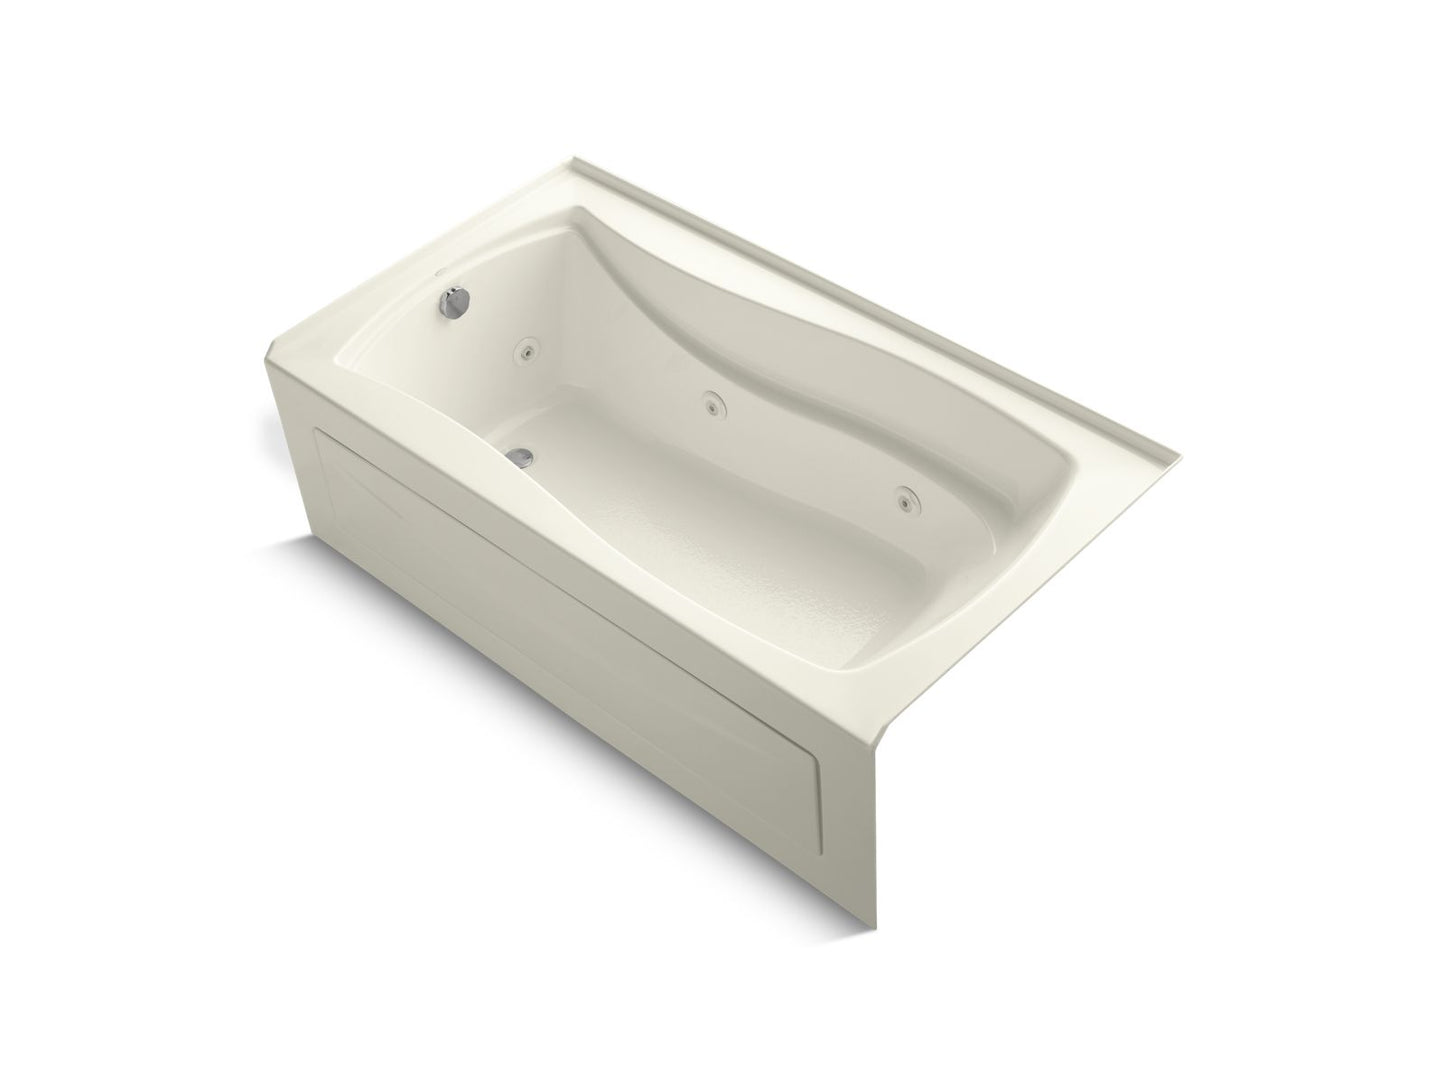 KOHLER K-1224-LAW-96 Mariposa 66" X 36" Alcove Whirlpool Bath With Bask Heated Surface, Left Drain In Biscuit